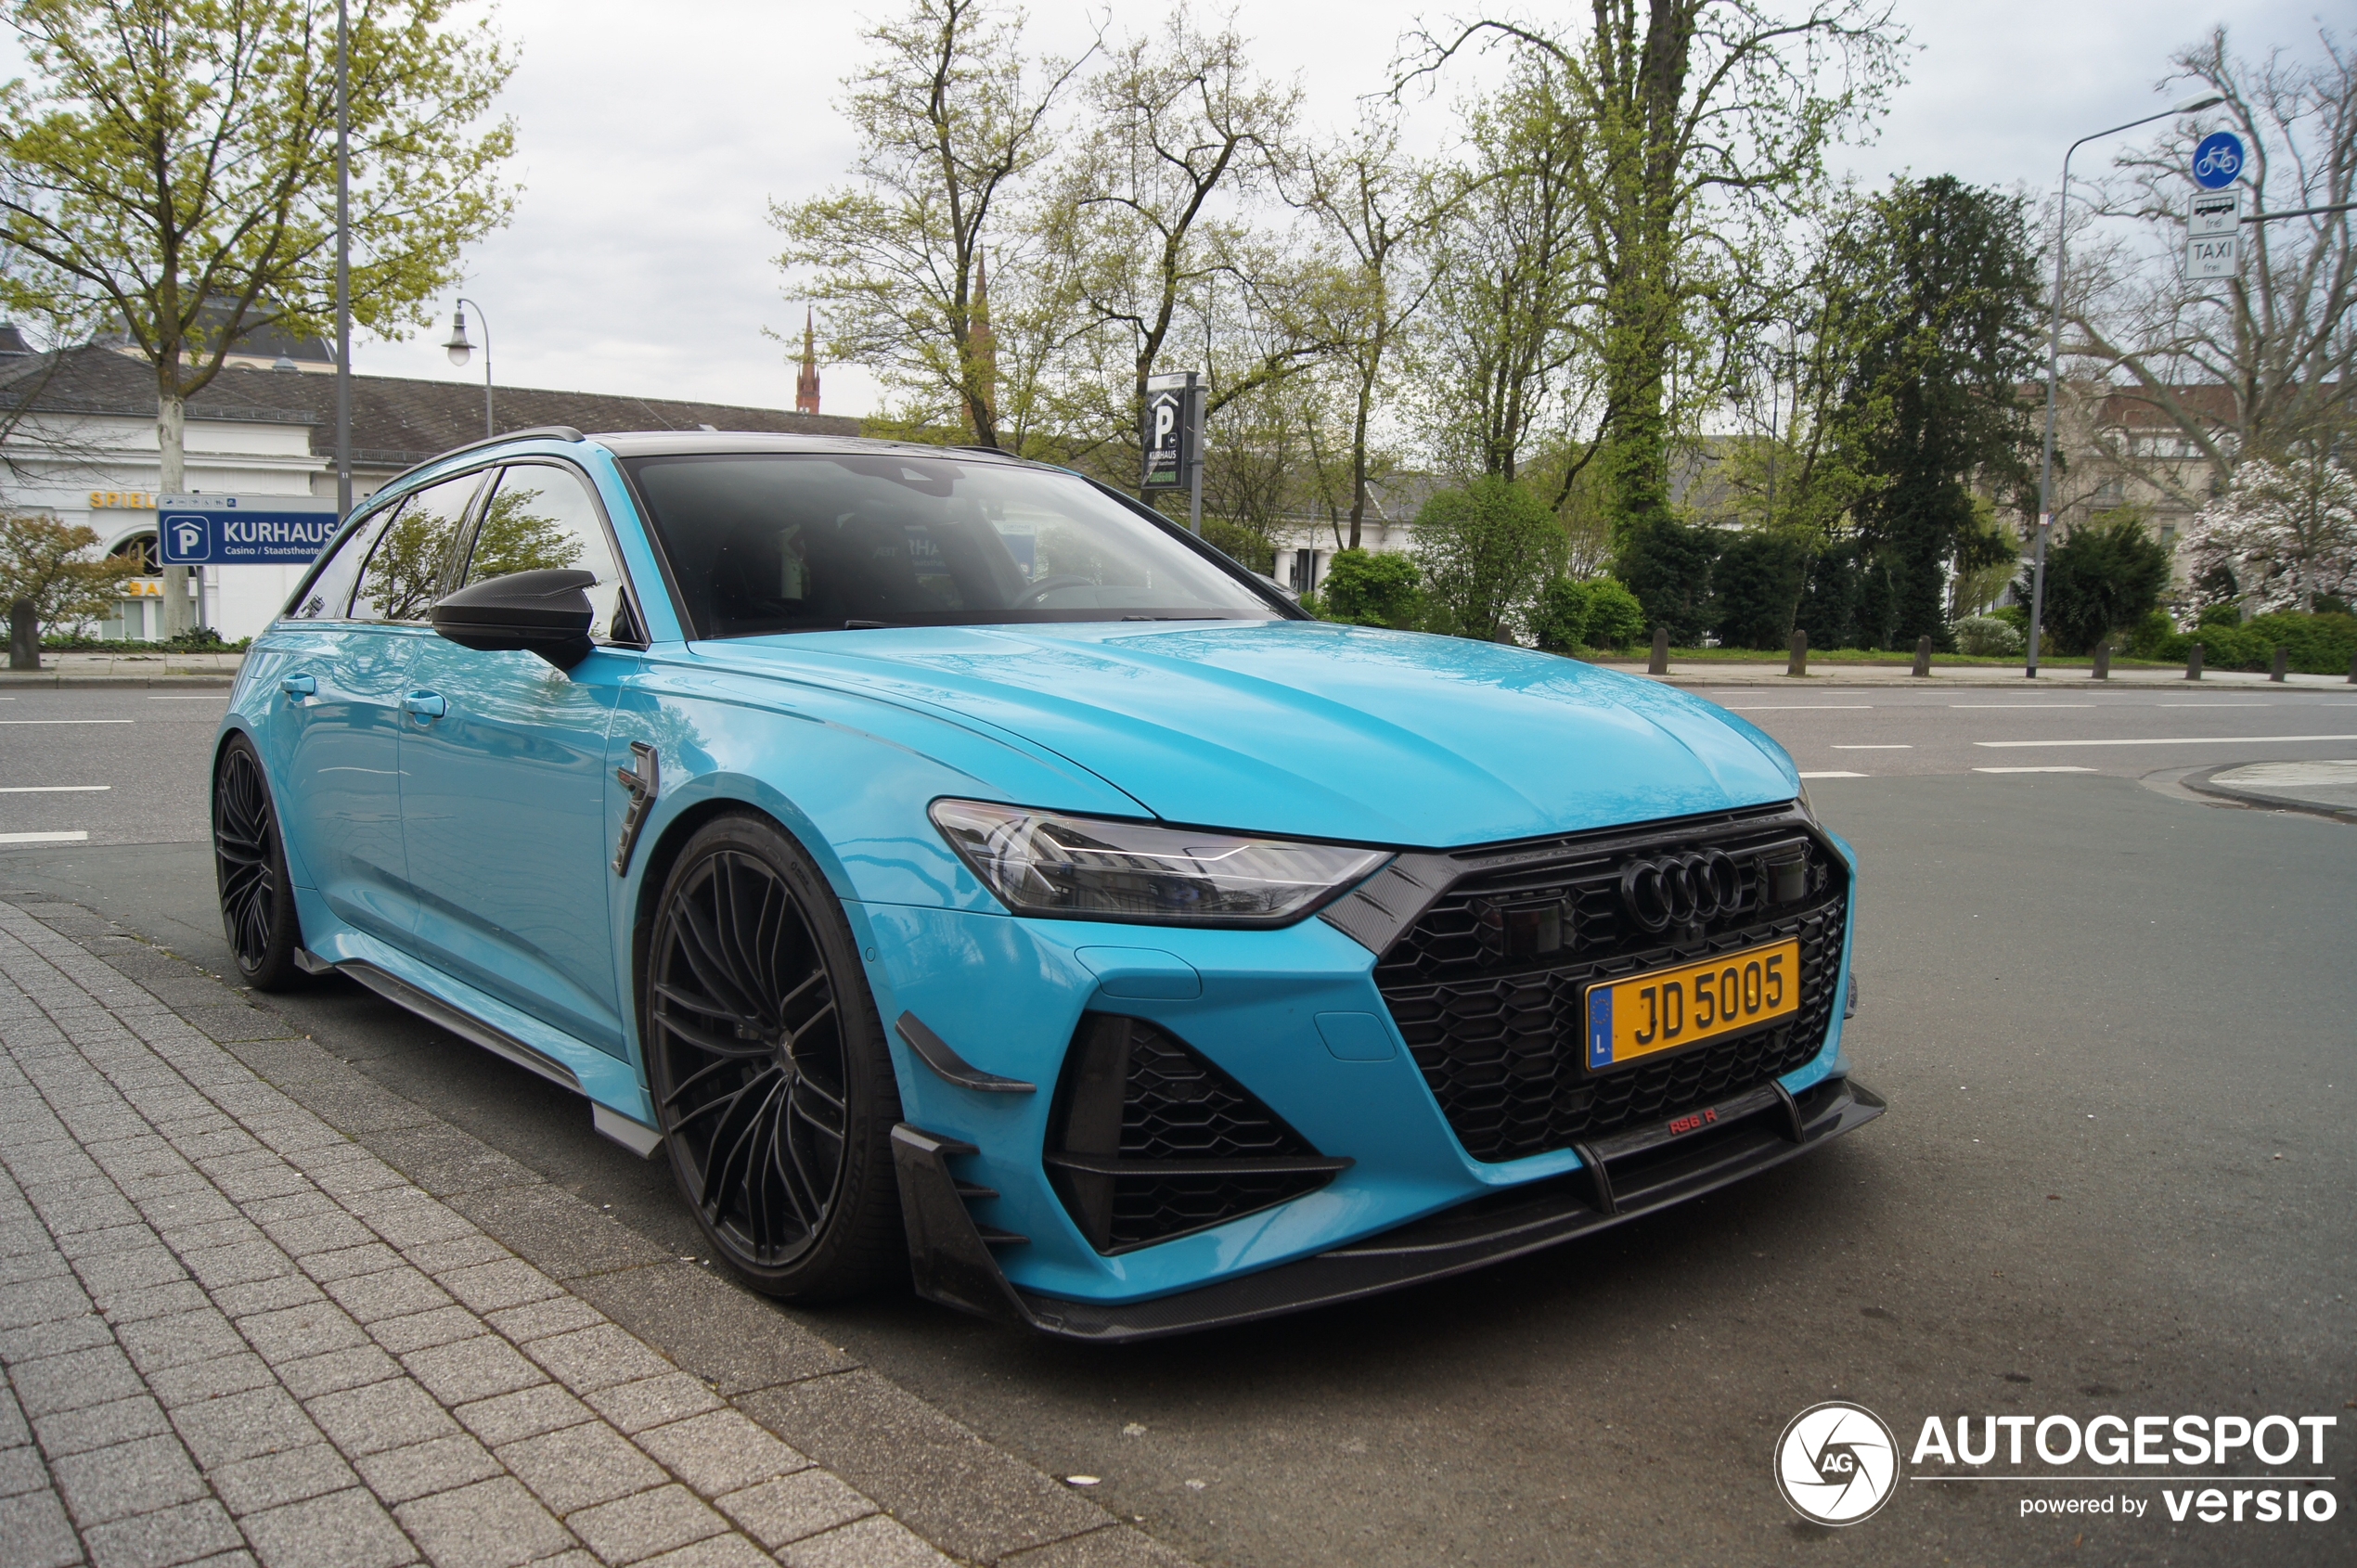 An Audi ABT RS6-R Avant C8 shows up in Wiesbaden